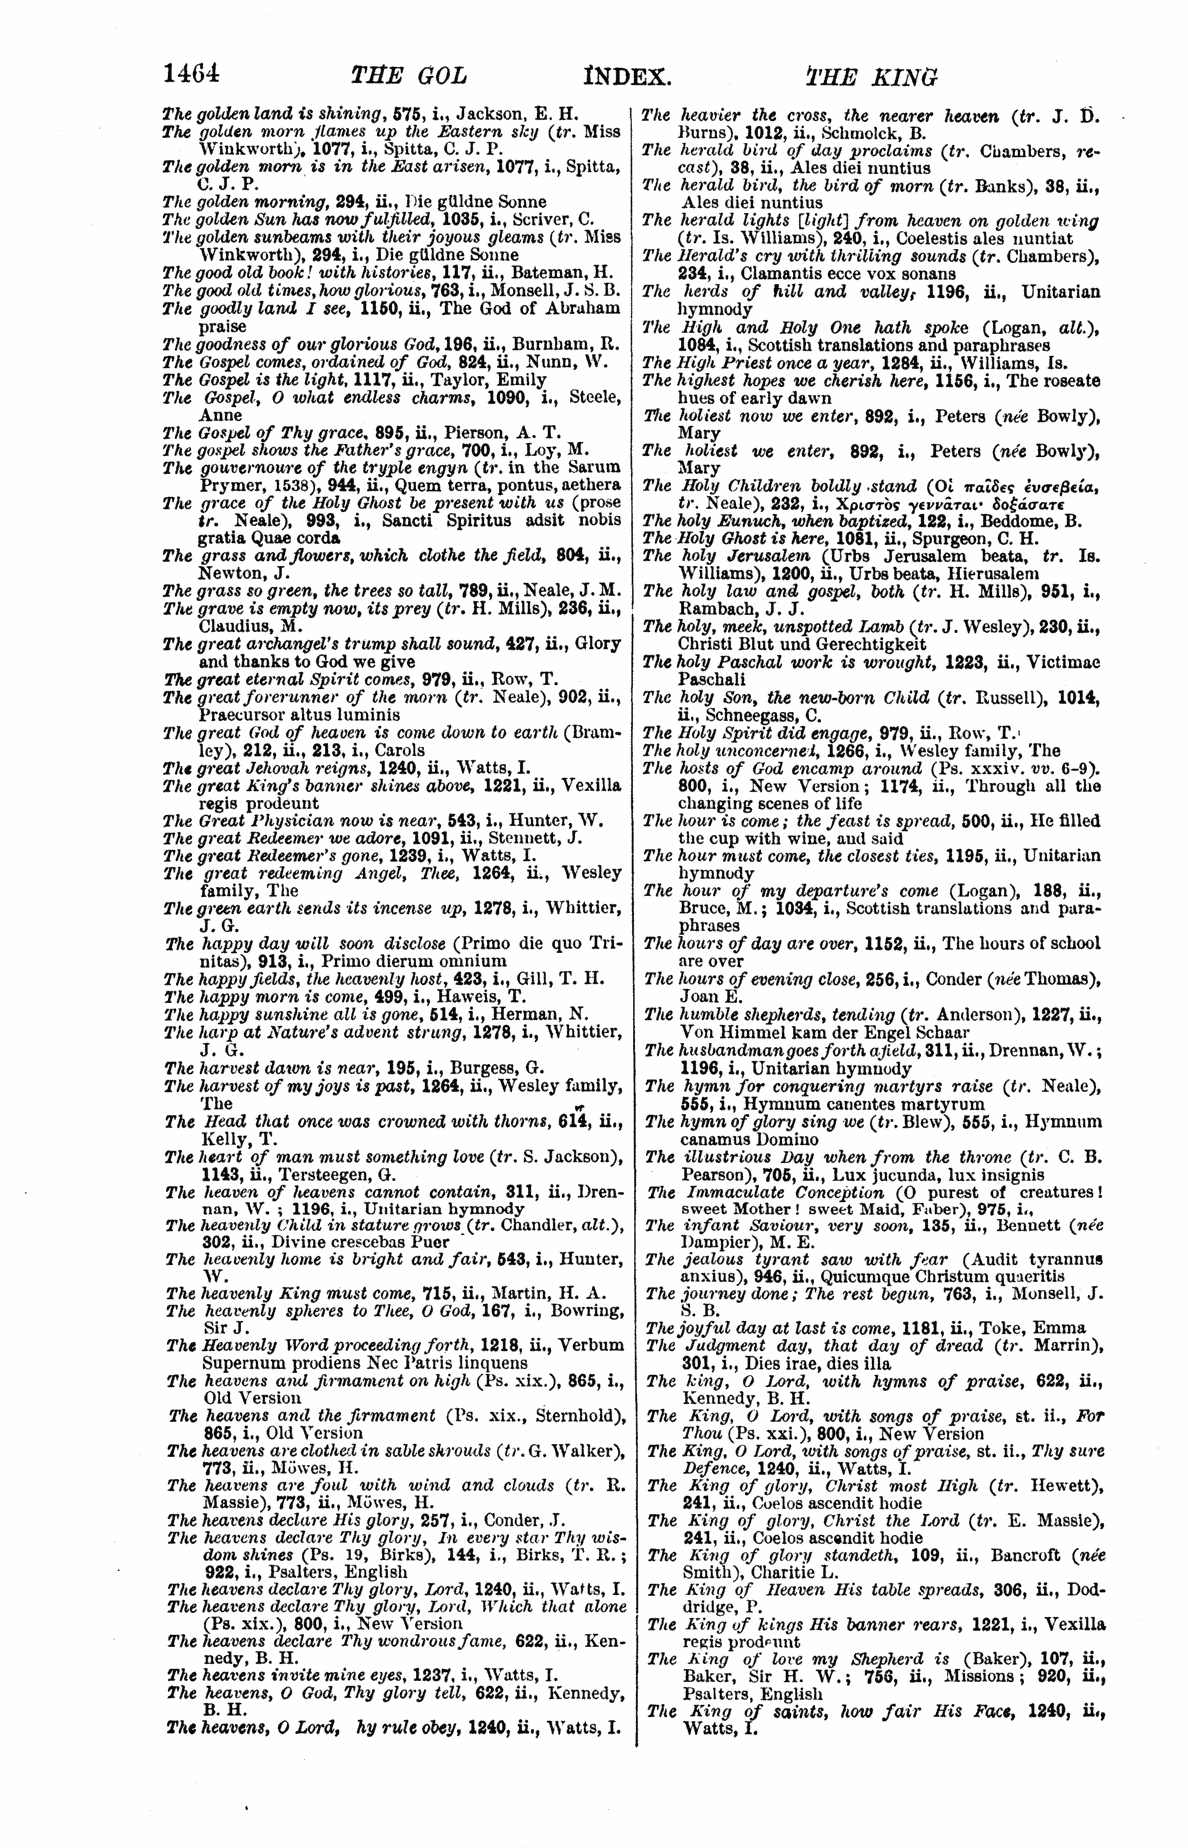 Image of page 1464